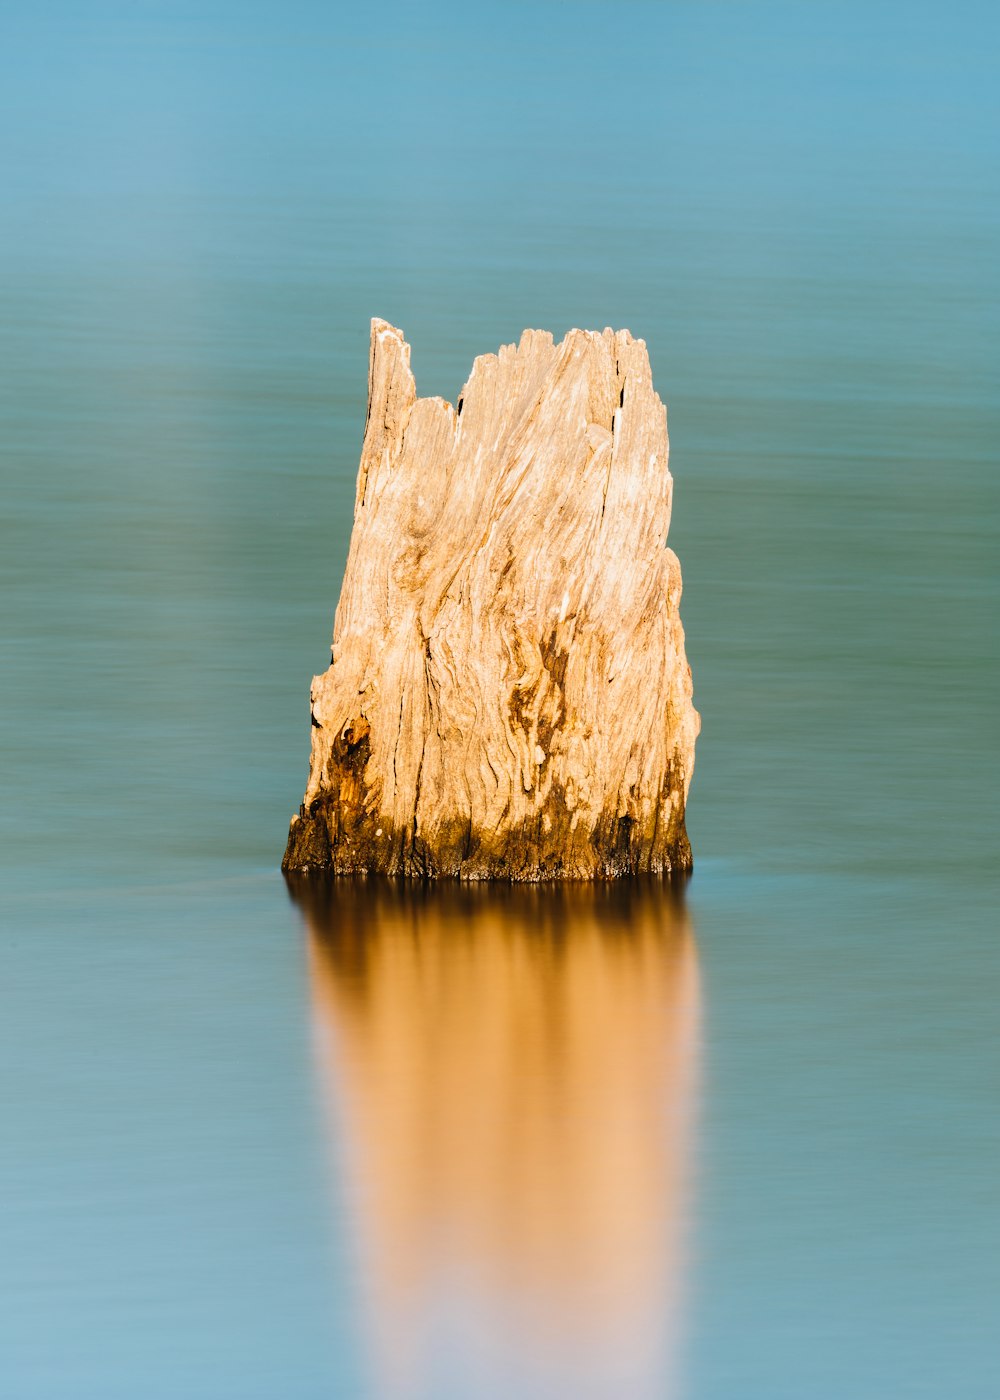 brown rock formation on body of water